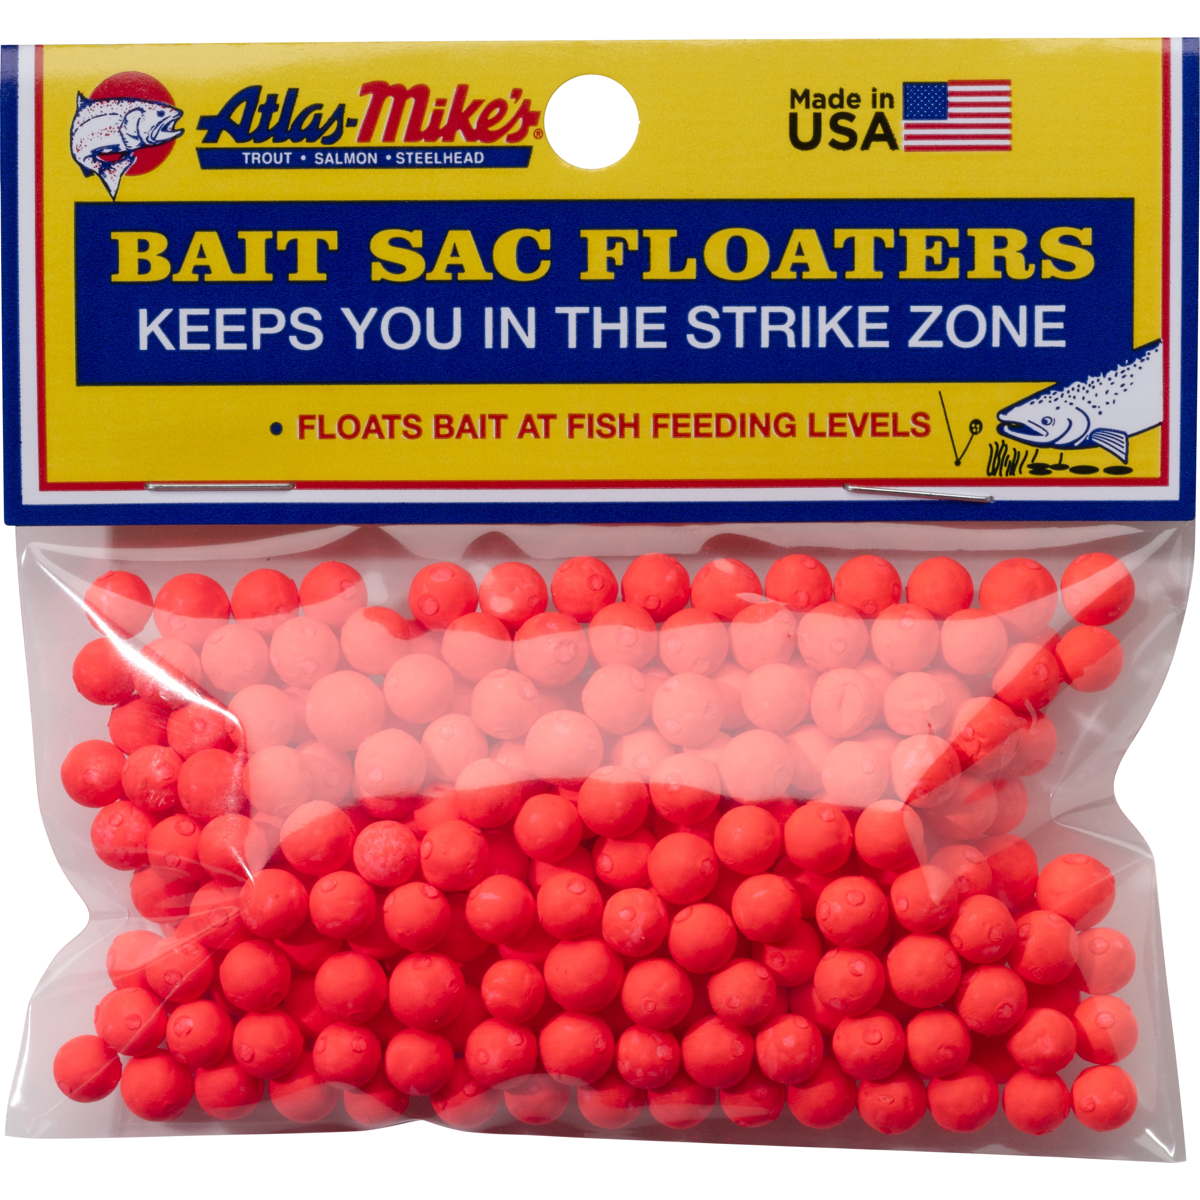 Photo of Atlas-Mike's Bait Sac Floaters for sale at United Tackle Shops.